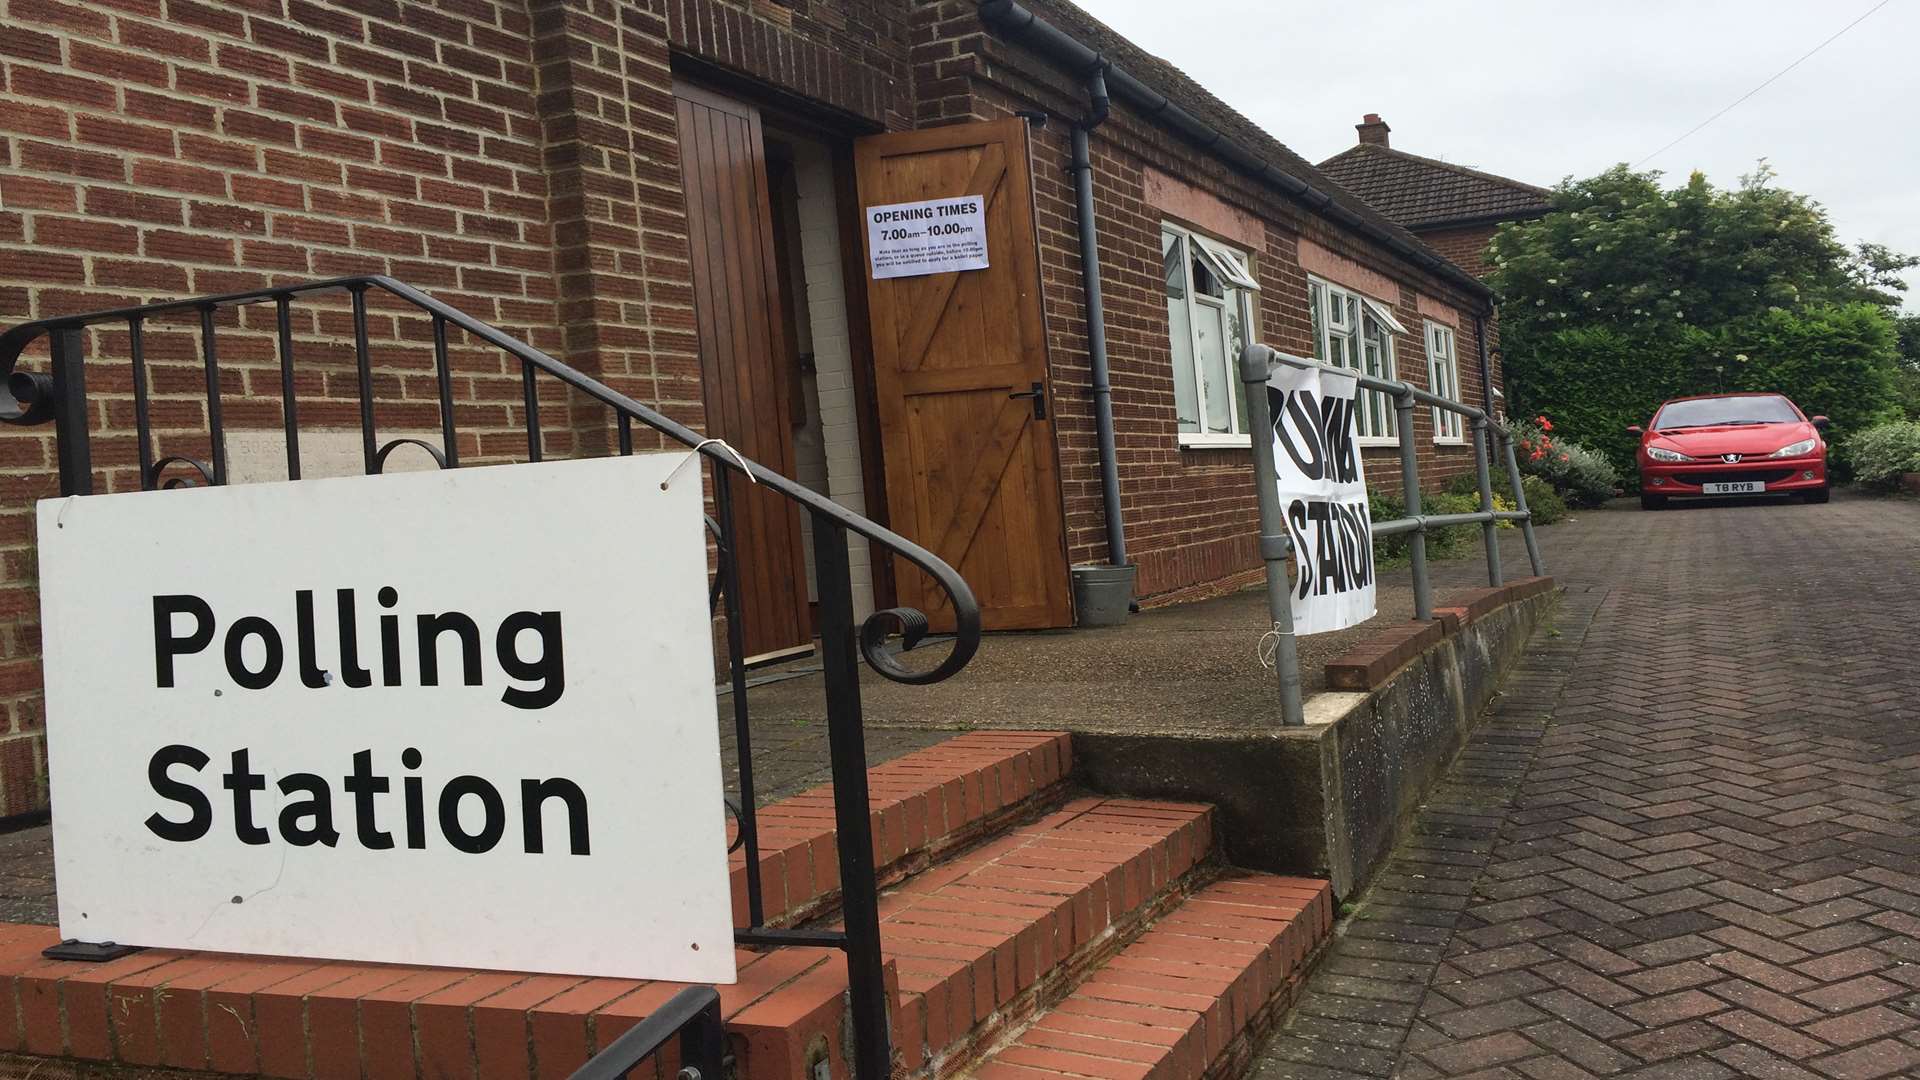 The polling station at the village hall in Borstal